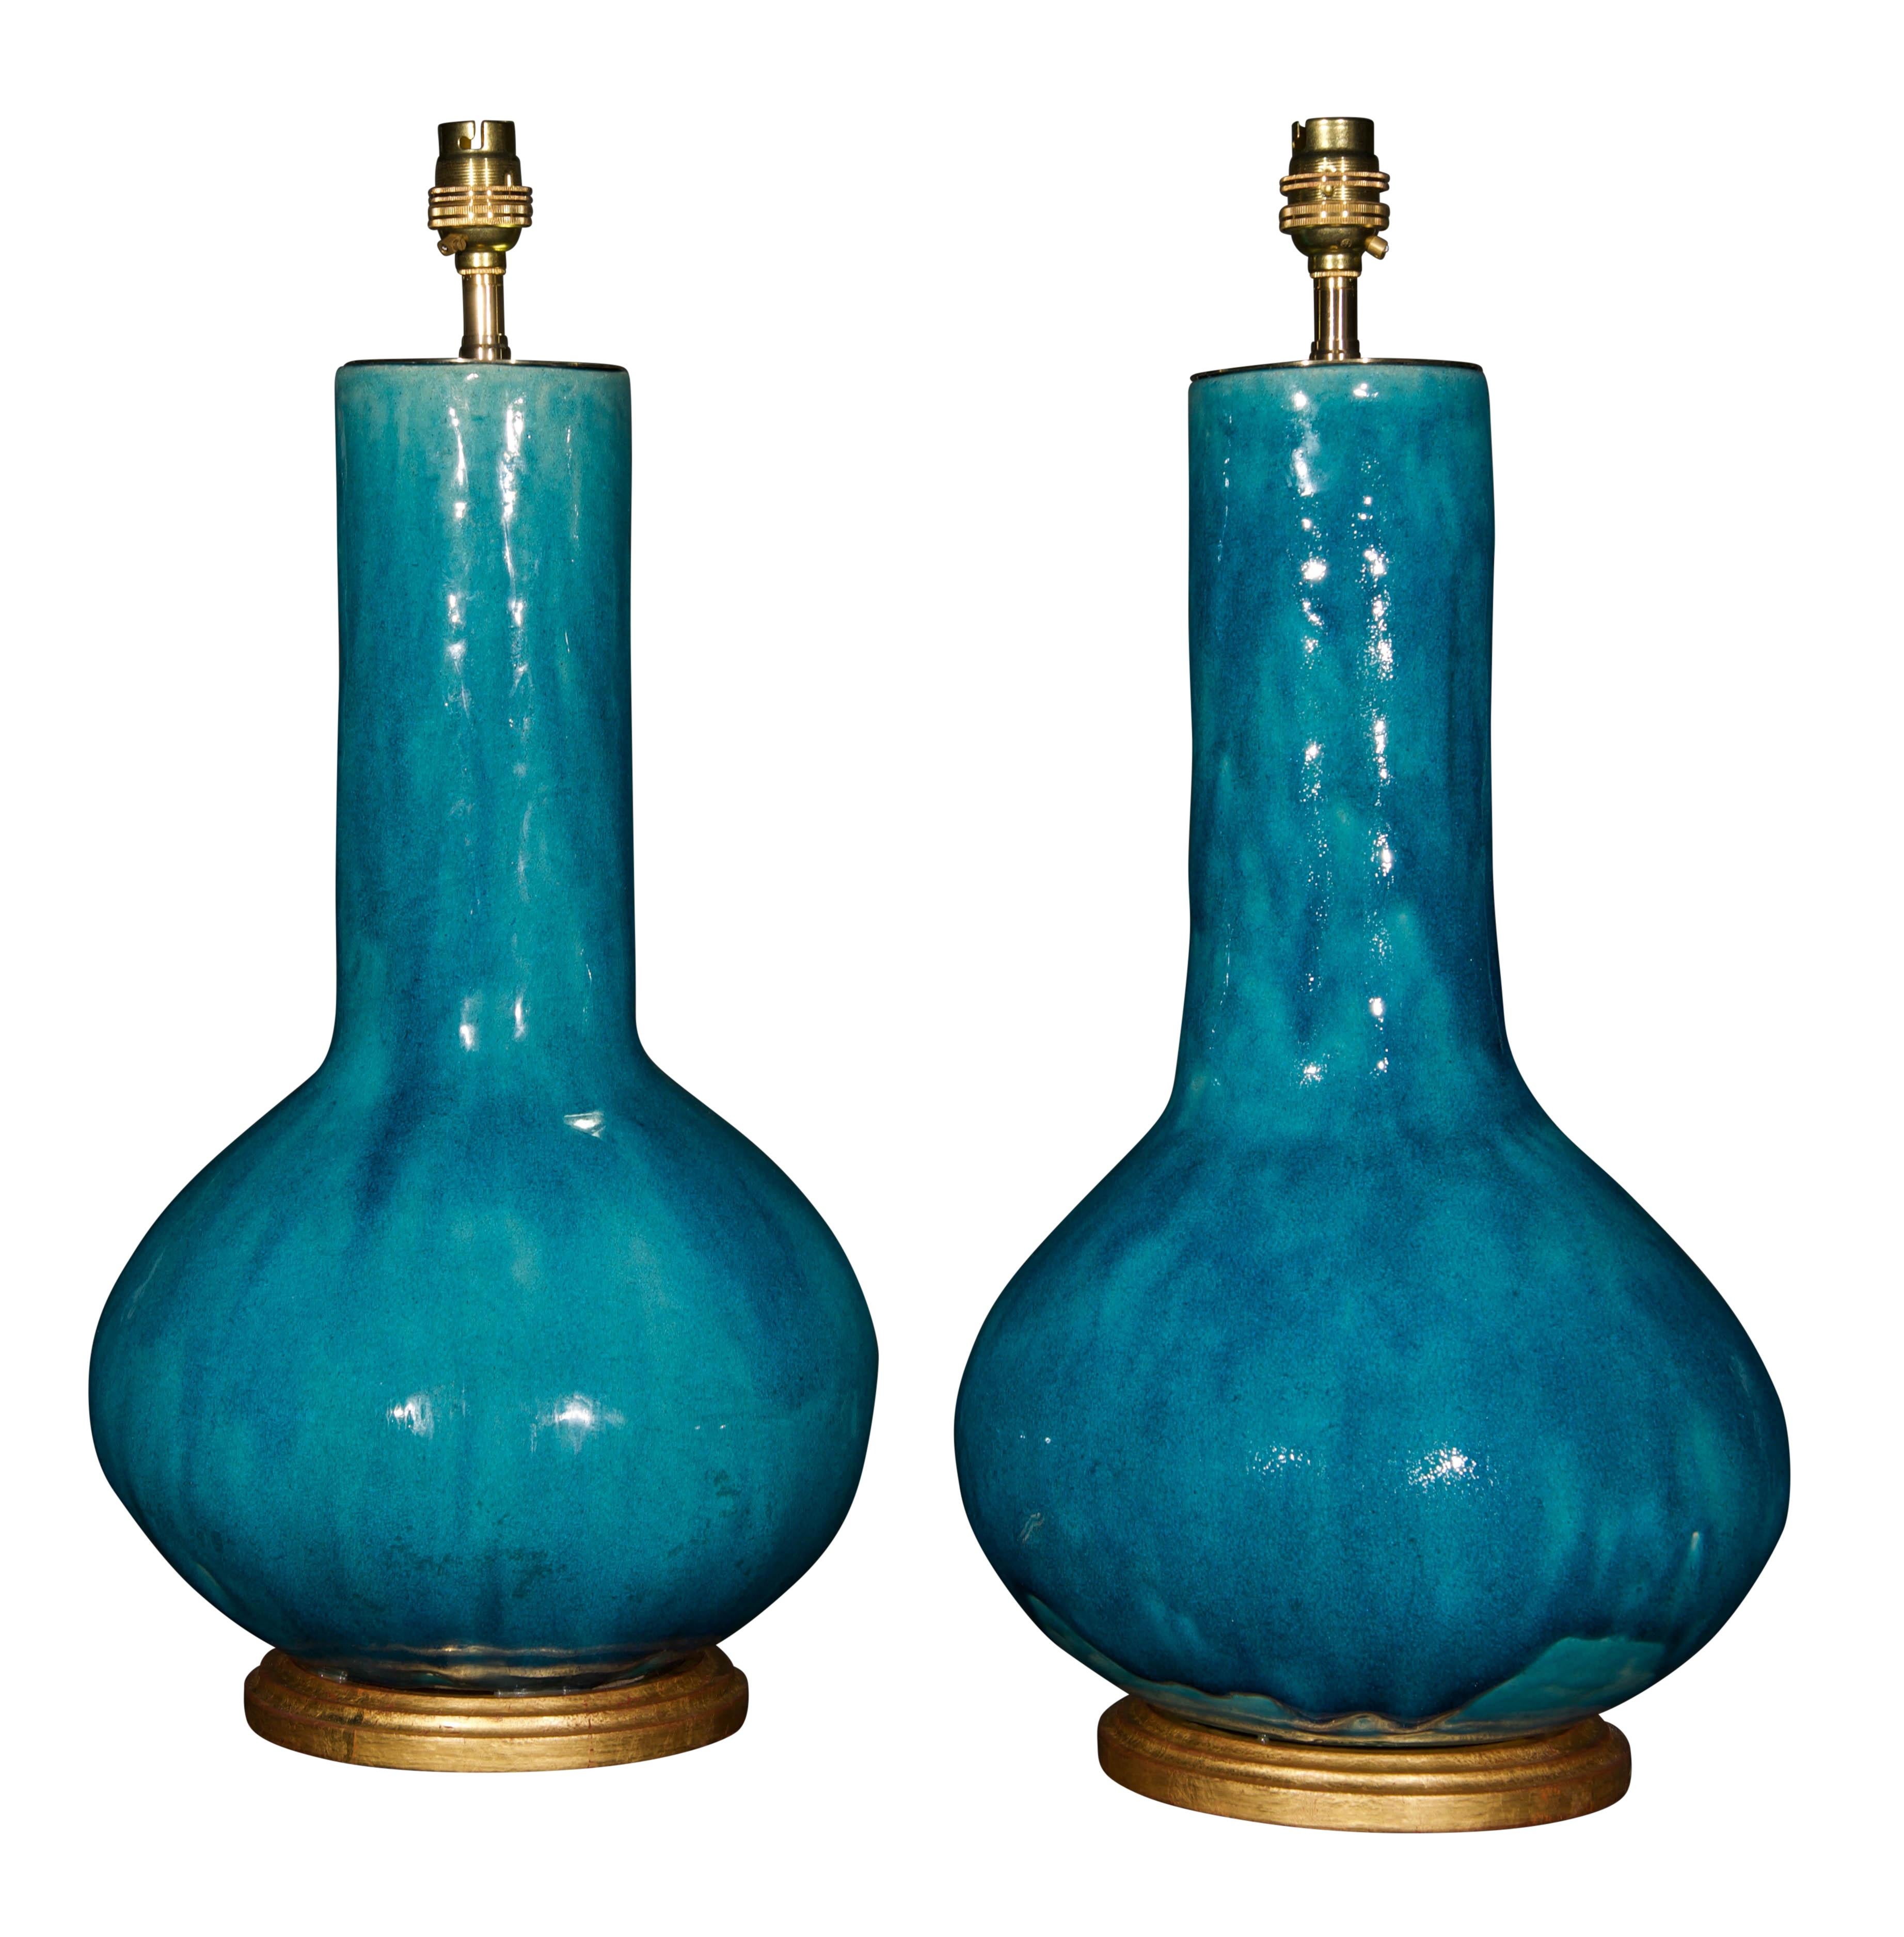 Glazed Pair of French Early 20th Century Turquoise Glaze Porcelain Table Lamps